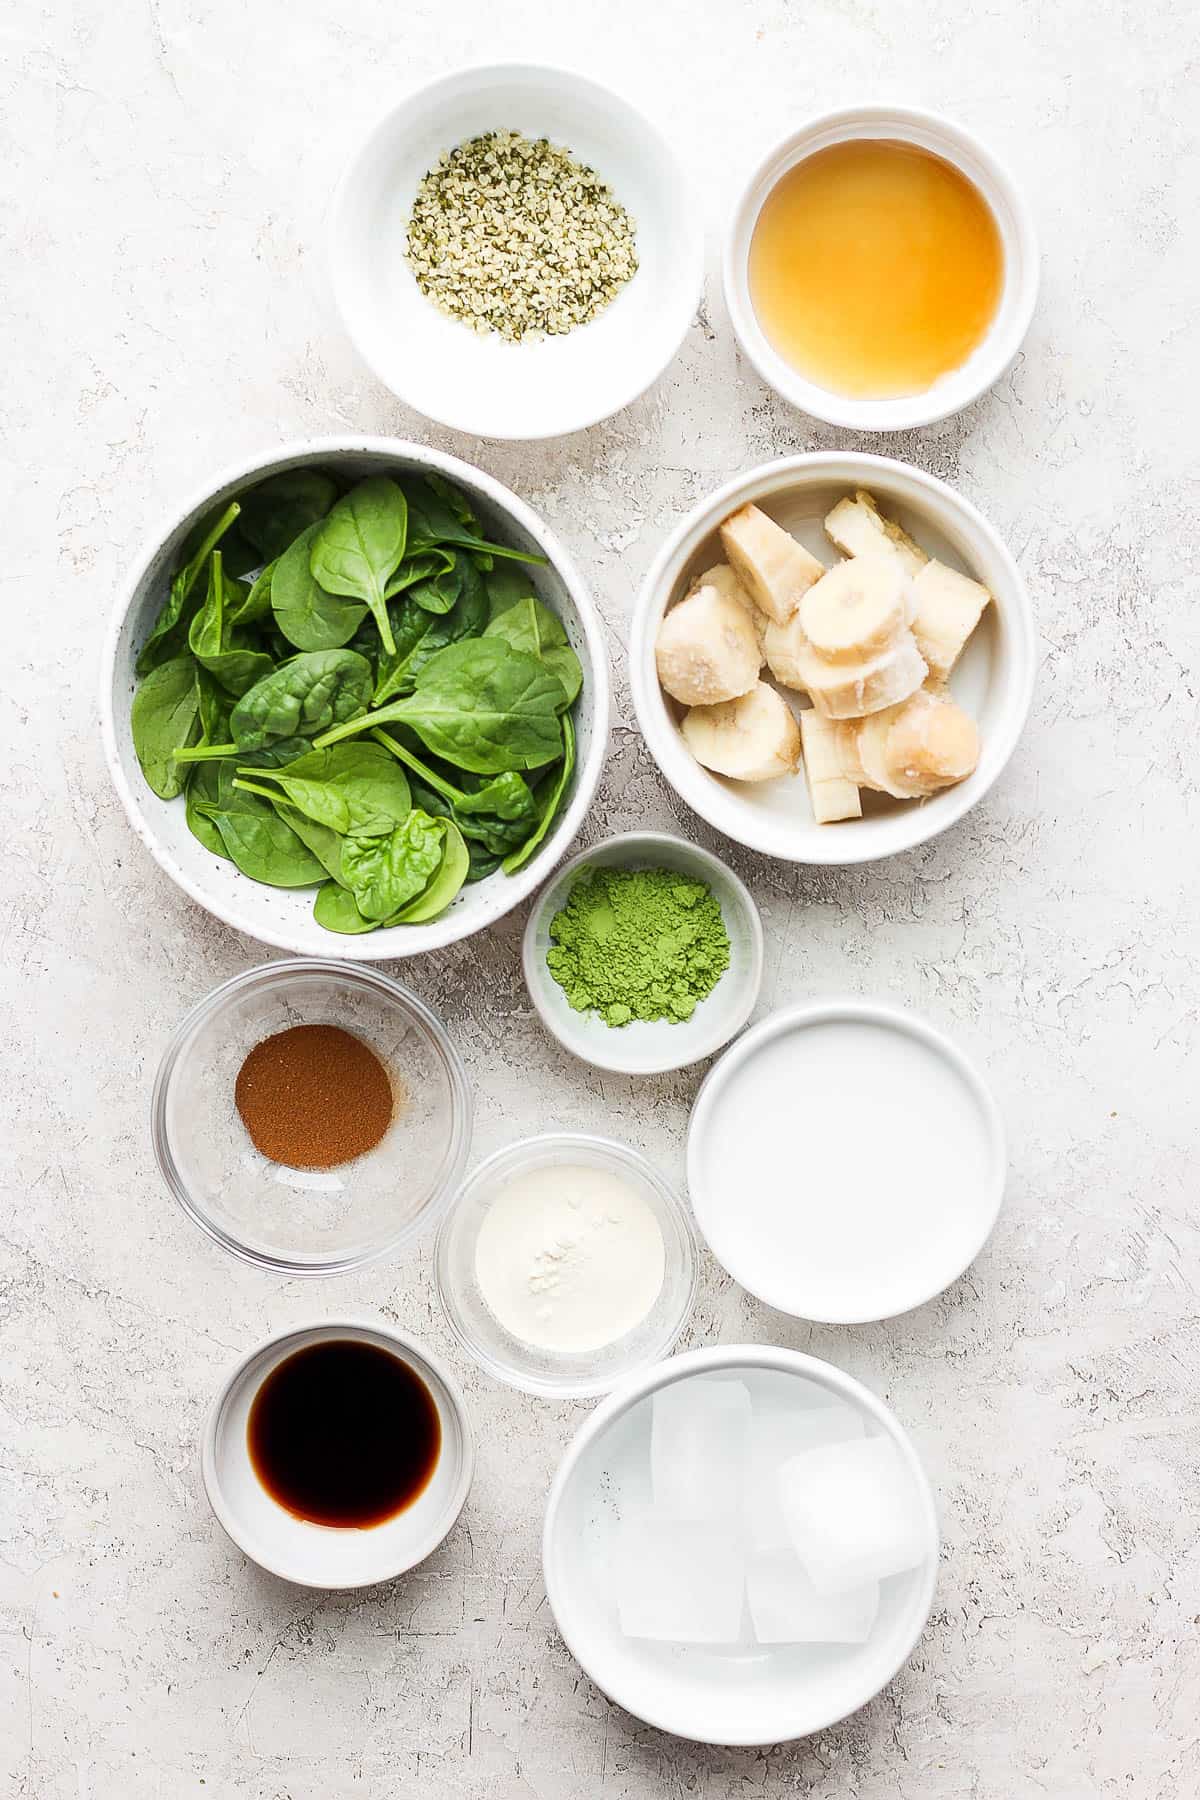 Ingredients for a matcha smoothie in separate bowls.